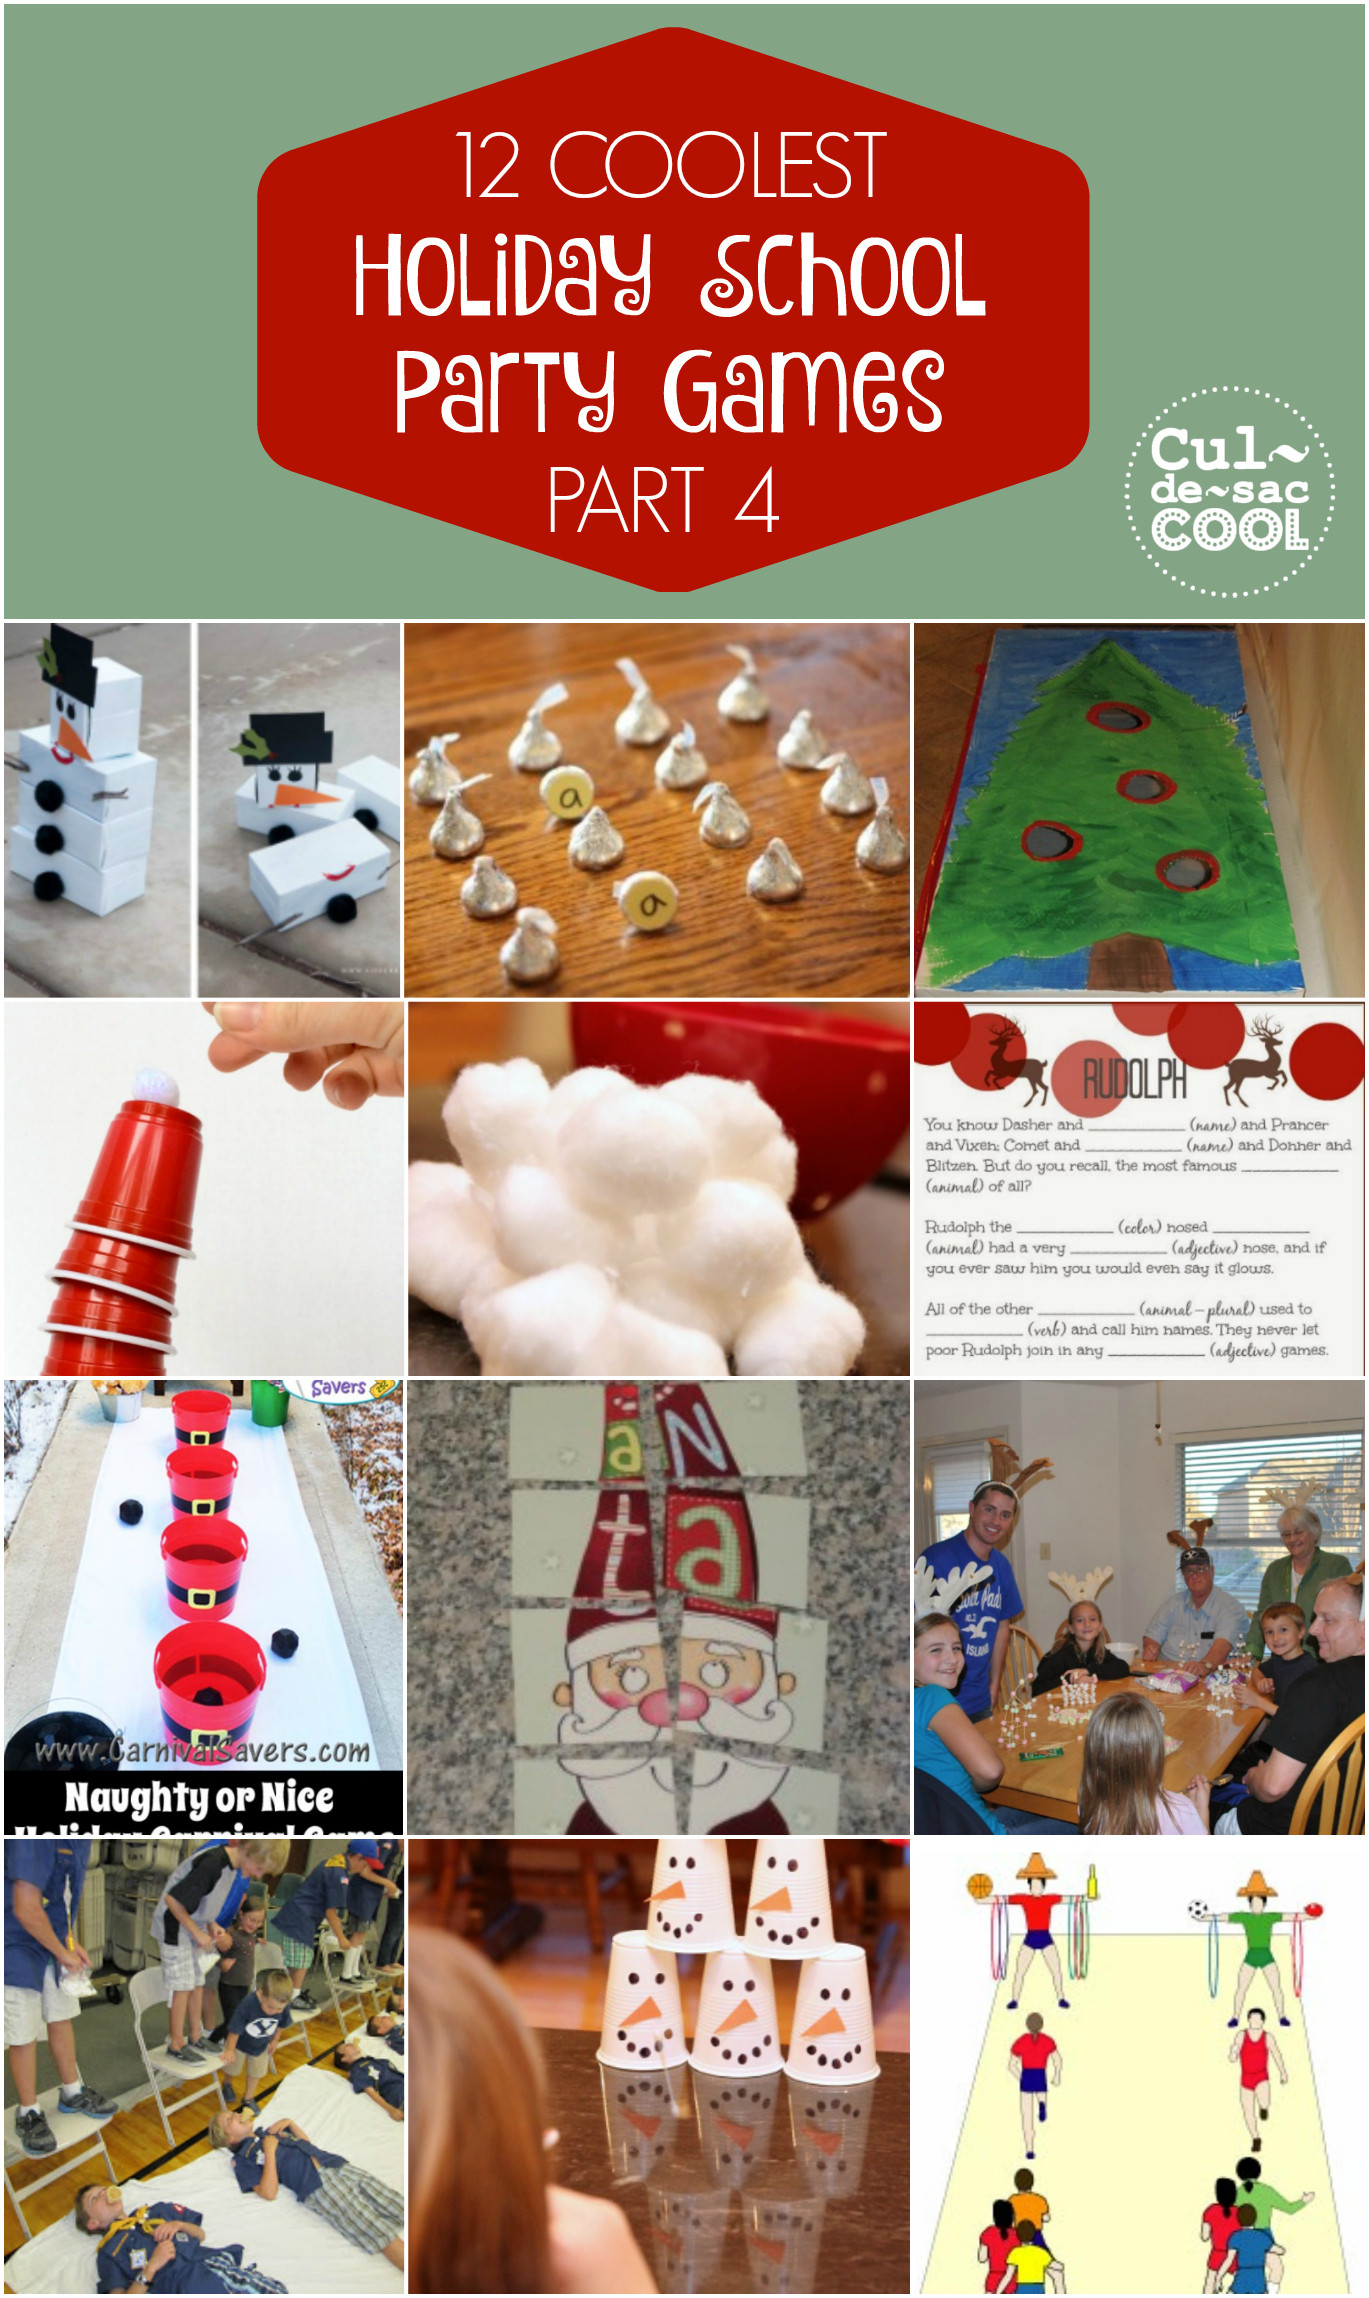 School Christmas Party Ideas
 12 COOLEST HOLIDAY SCHOOL PARTY GAMES — PART 4